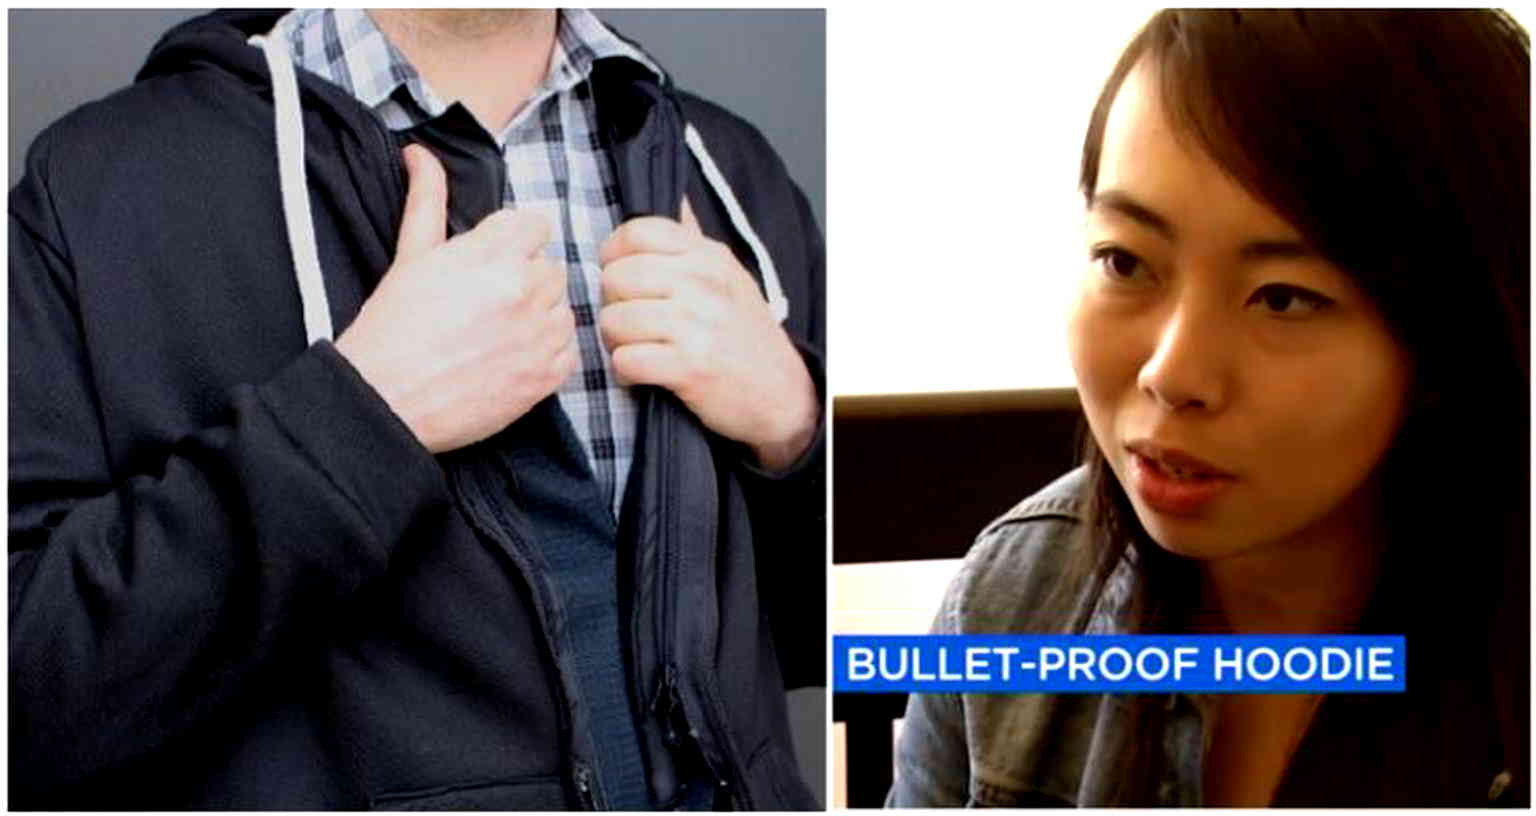 Bay Area Woman Creates Bullet-Proof Hoodies for Kids and Adults After Tragic Incident